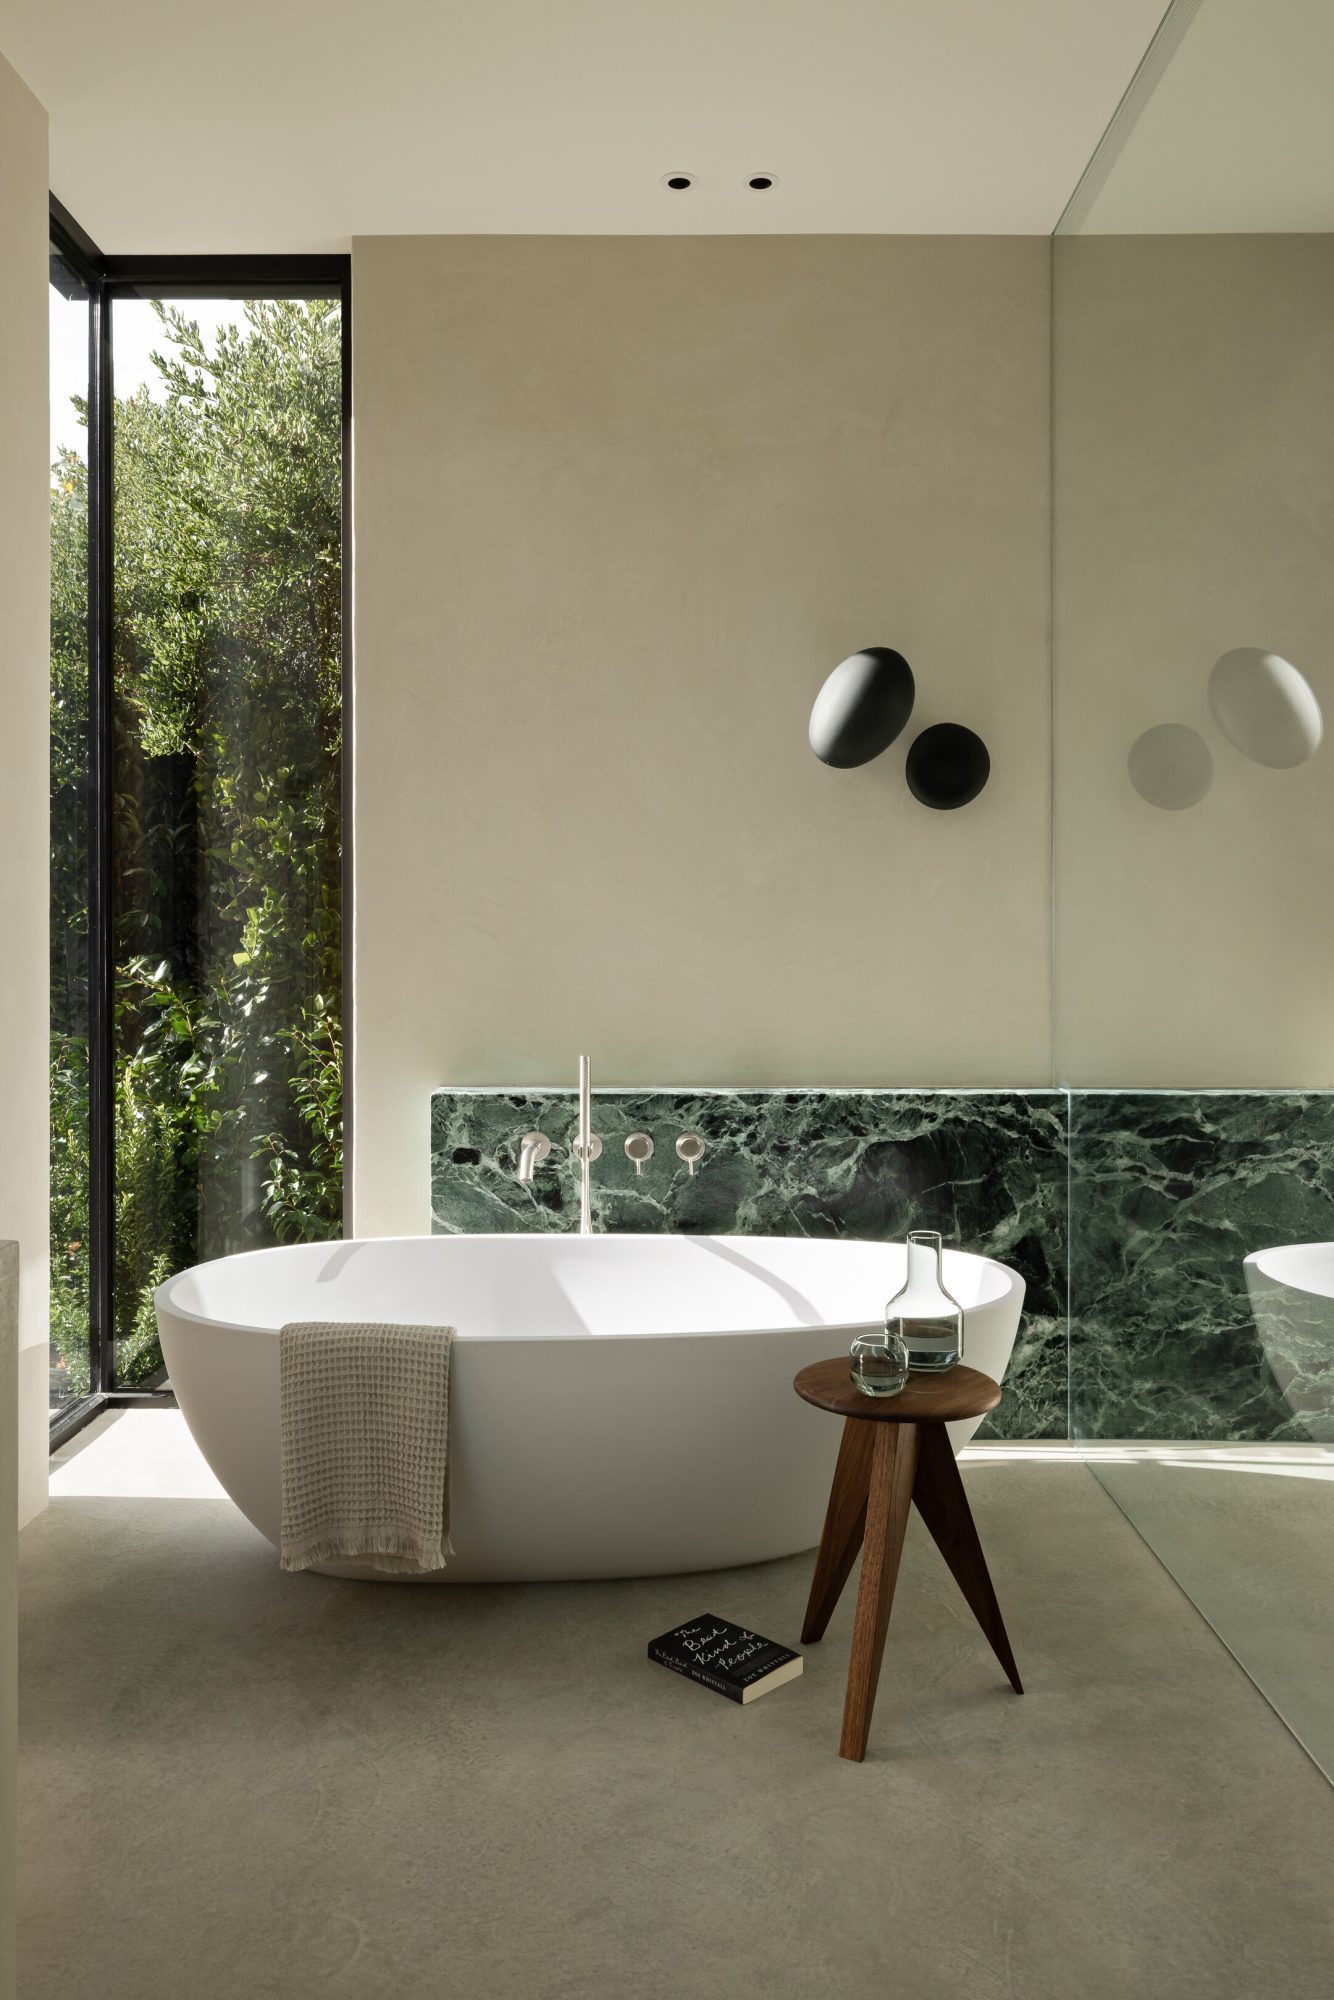 Minimalist and serene bathroom with a soaker tub and wooden stool. The windows face a bunch of foliage.